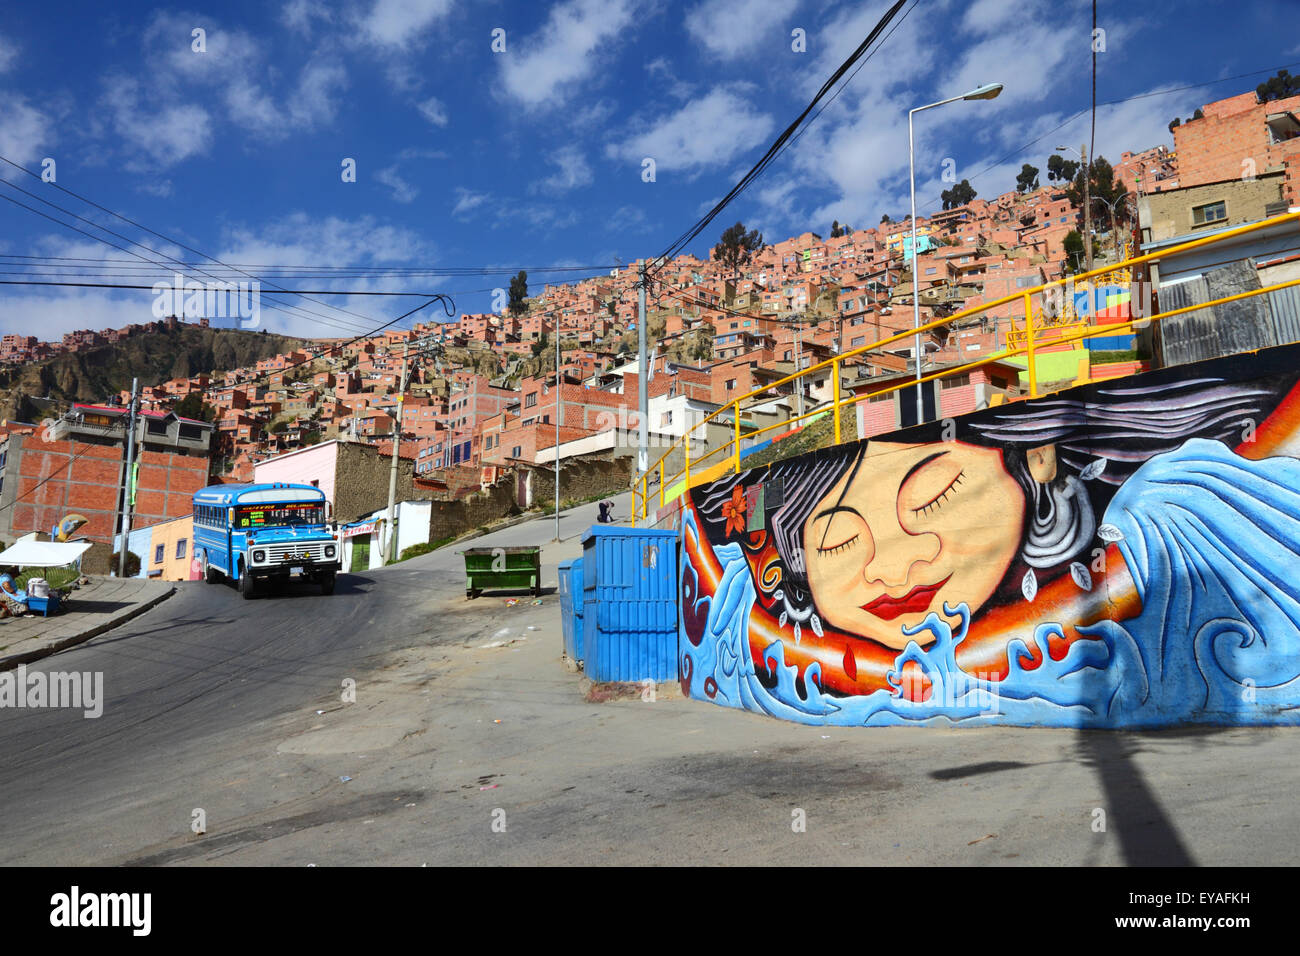 Mural on wall in city suburb on steep hillside, typical old blue micro bus used as public transport in background, La Paz, Bolivia Stock Photo